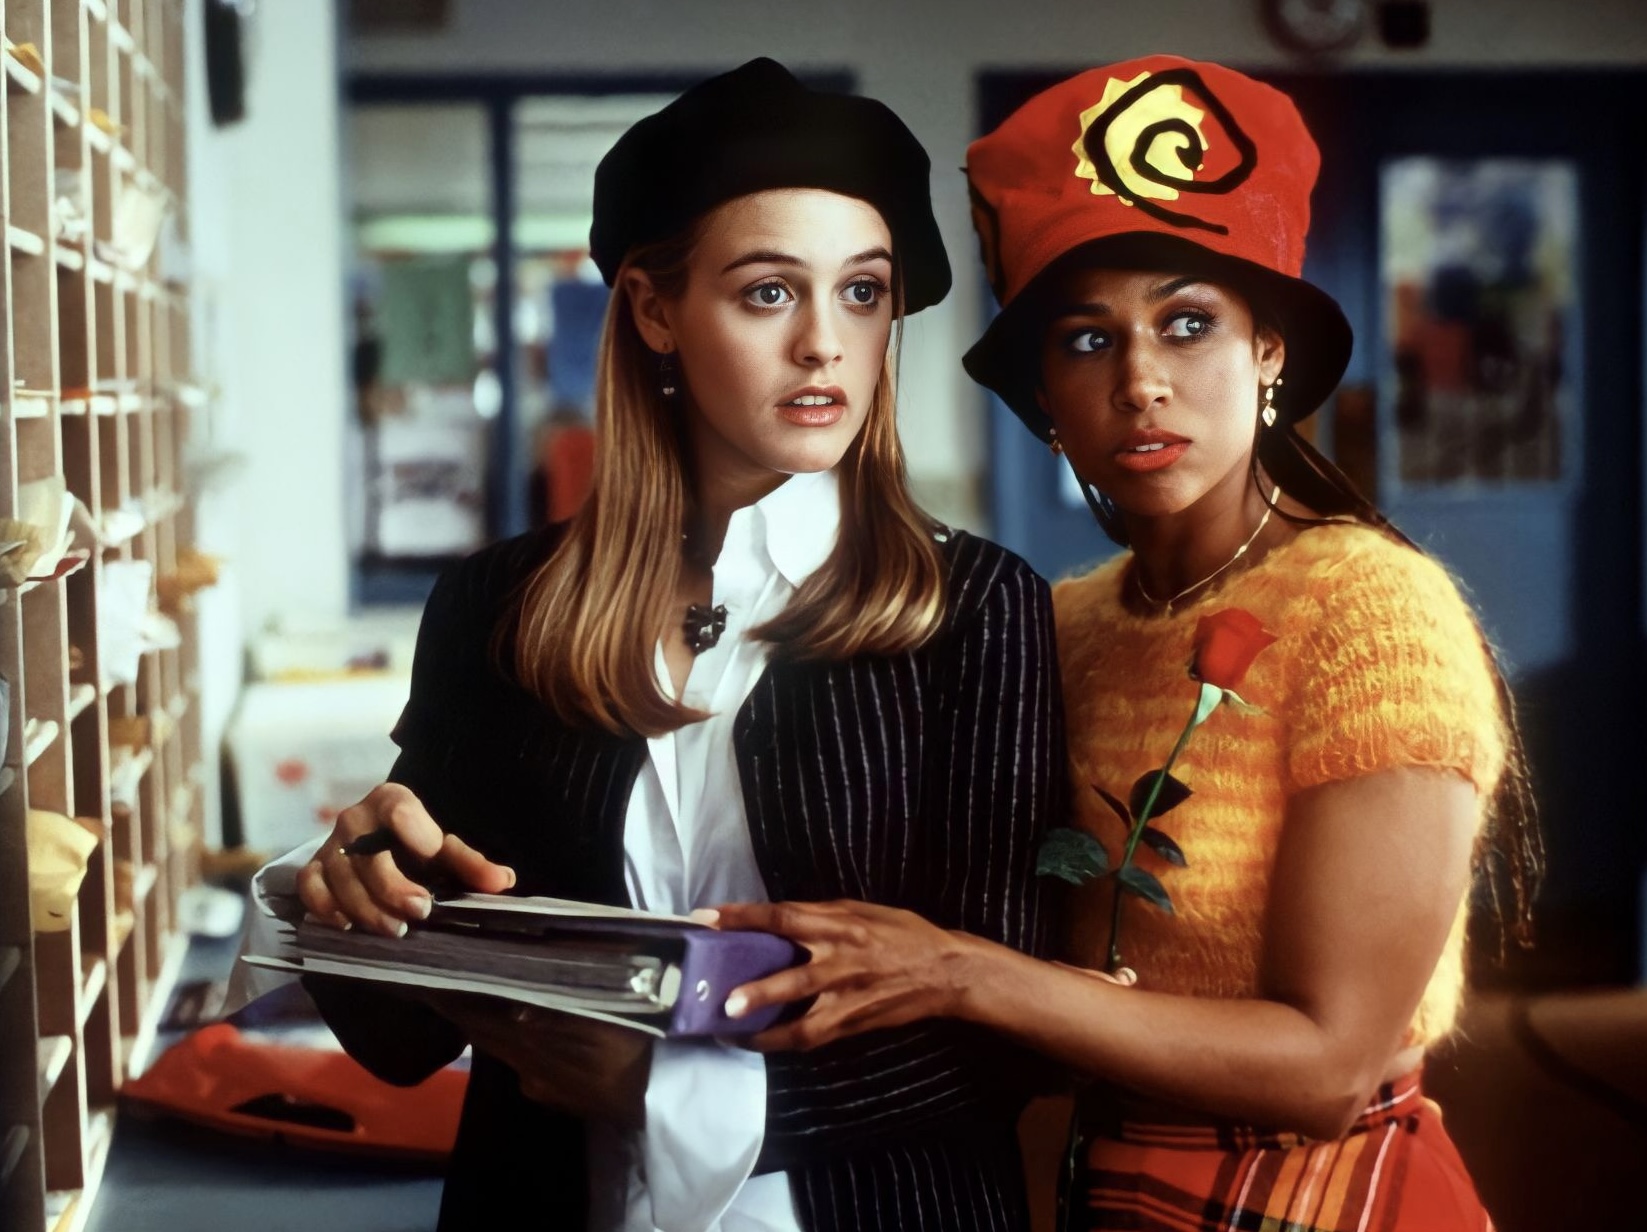 Stacey Dash and Alicia Silverstone in “Clueless”